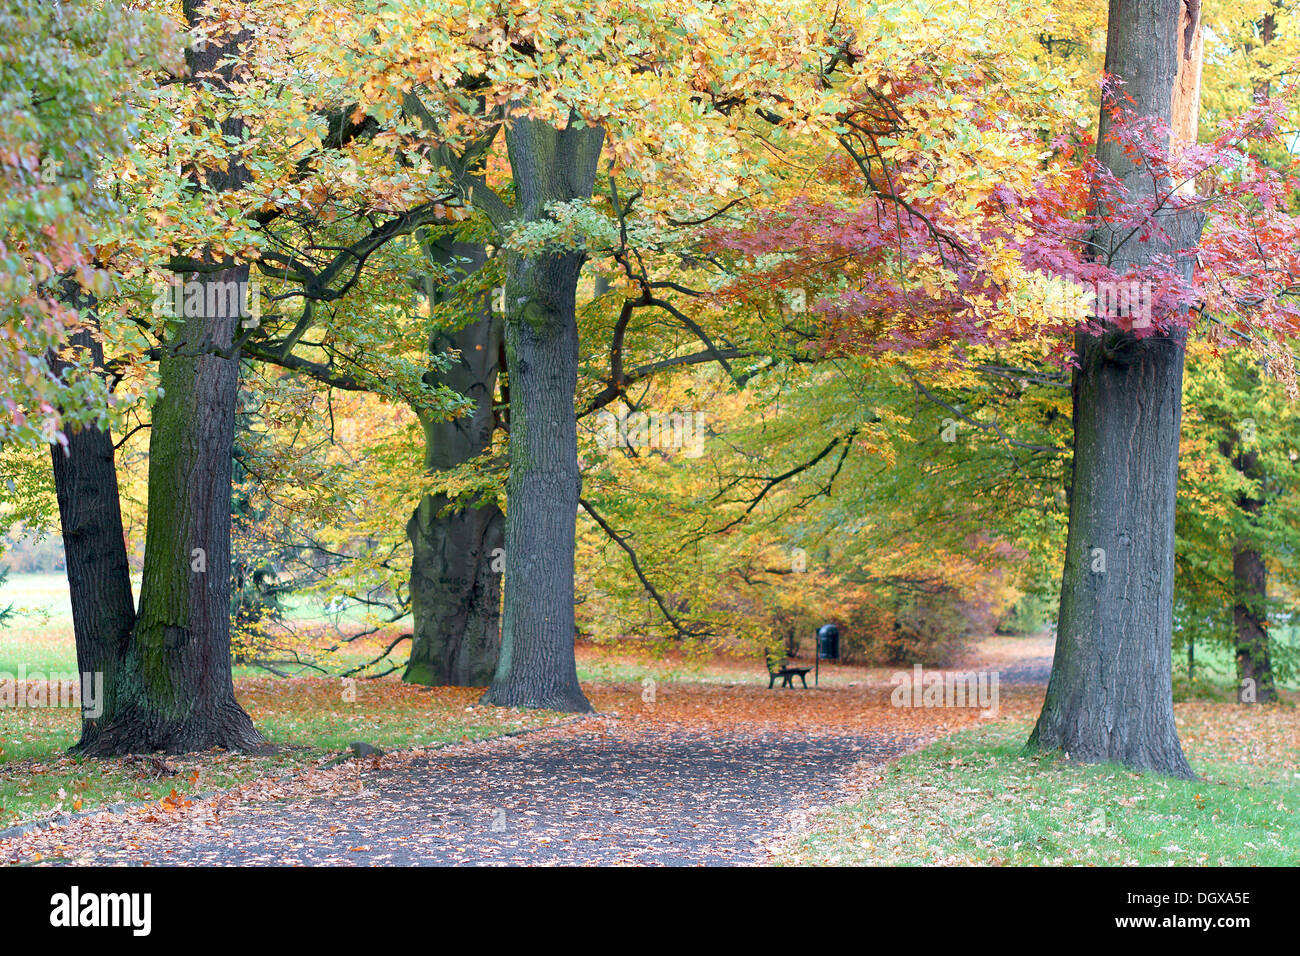 Autumn park lane with colorful trees Stock Photo